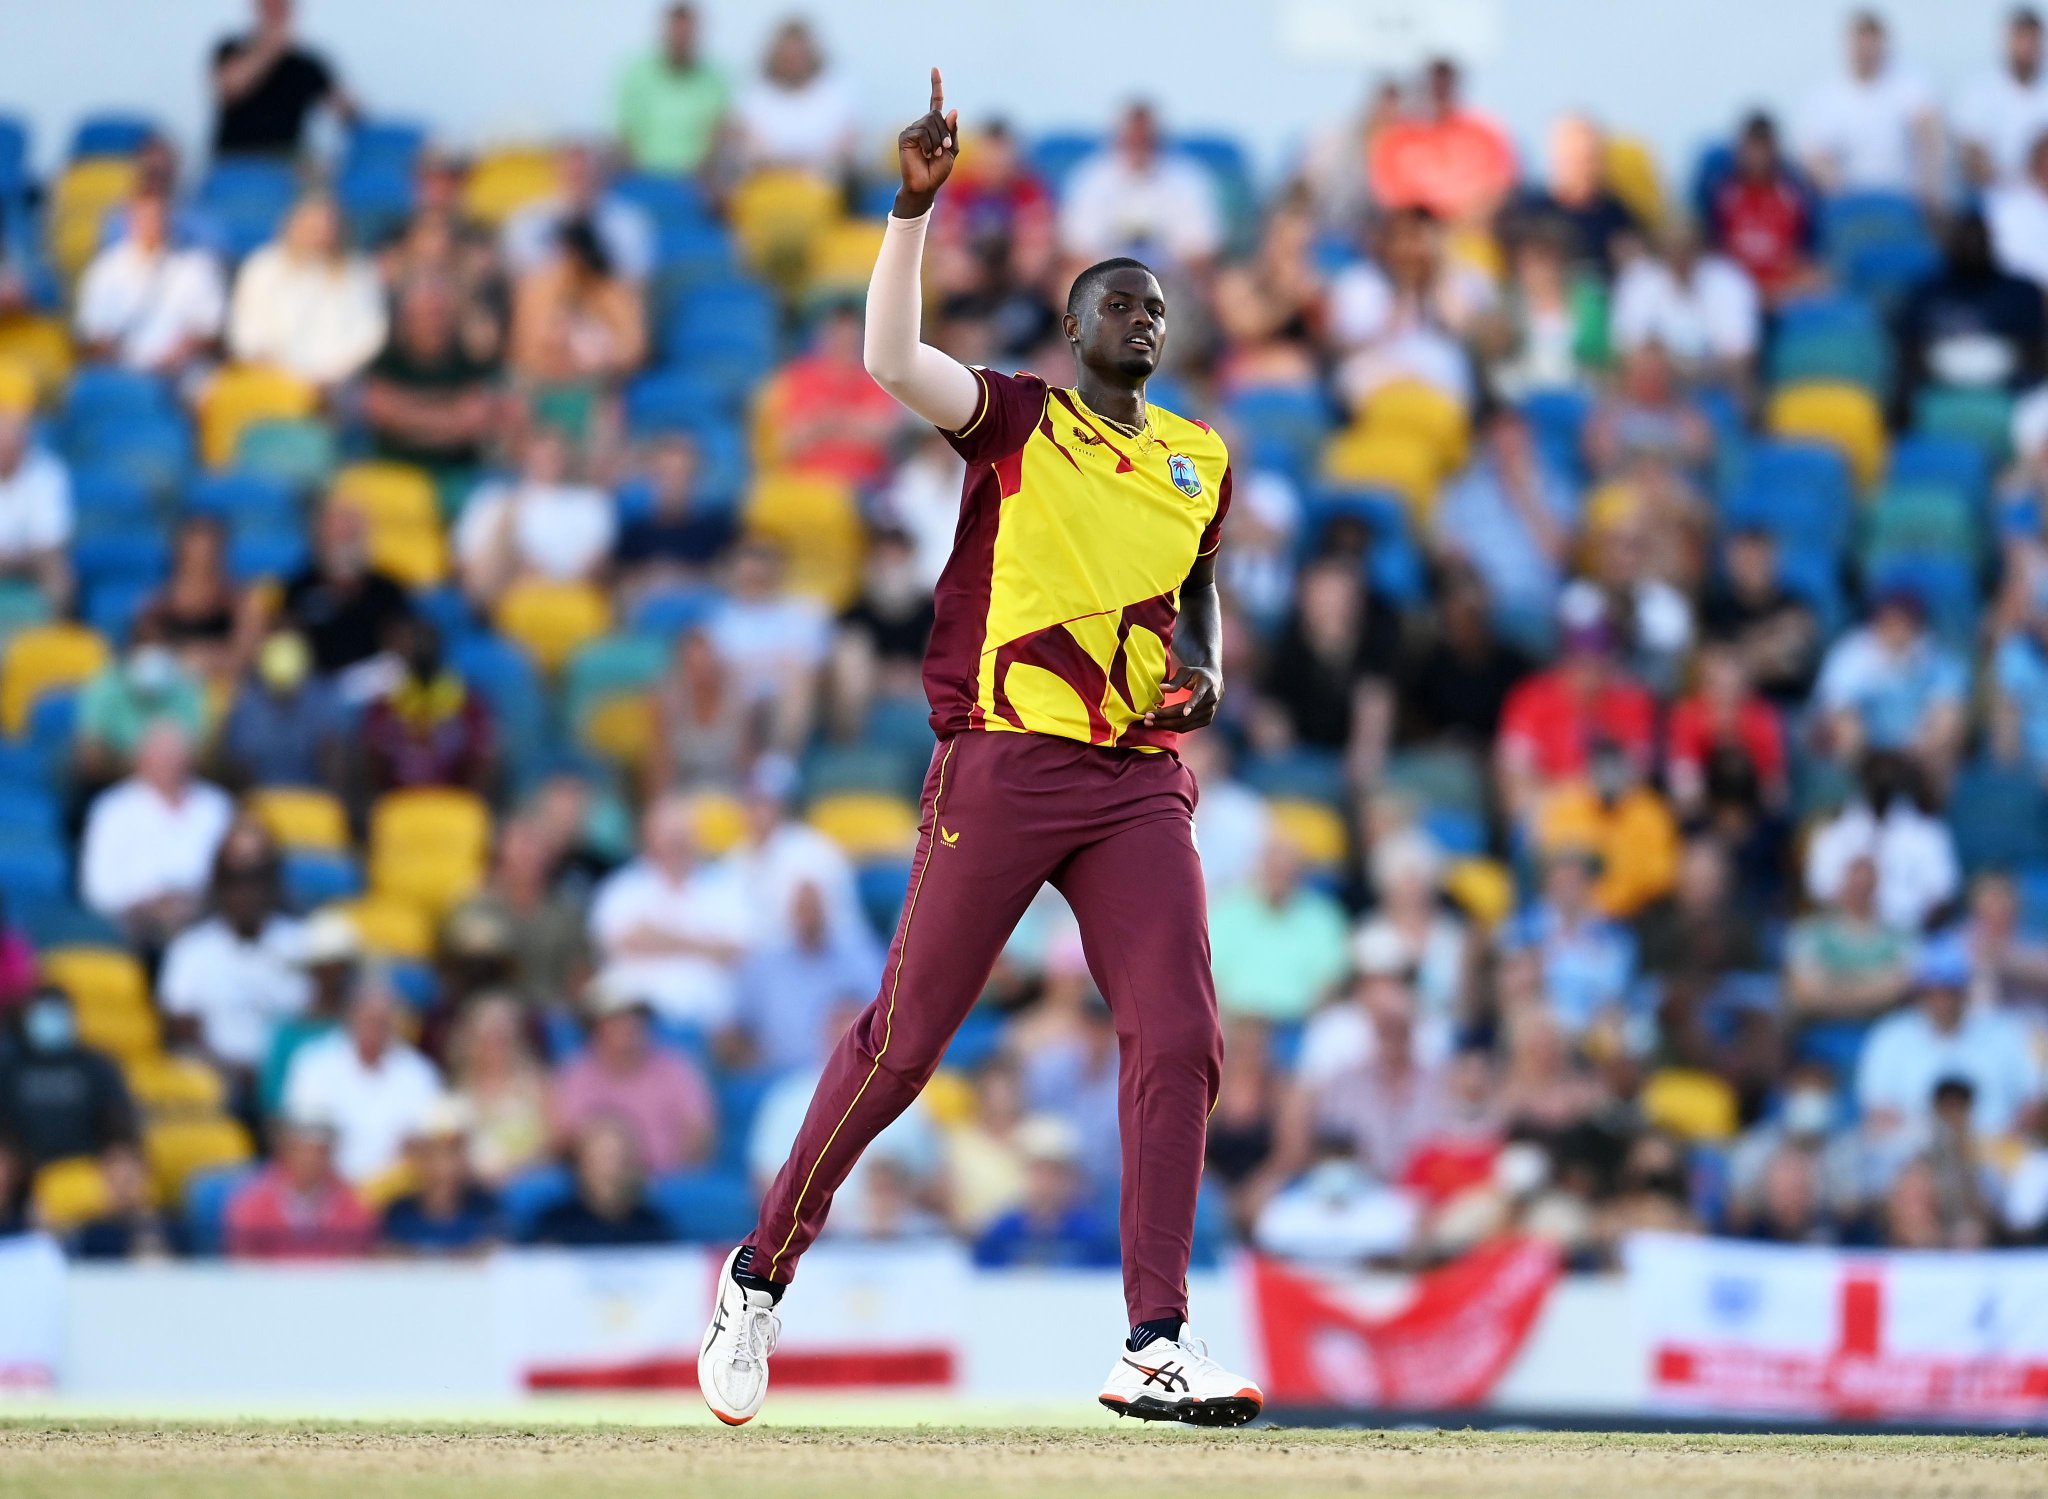 IPL 2022 | Royal Challengers Bangalore to bid heavily for Jason Holder in mega auction - Reports